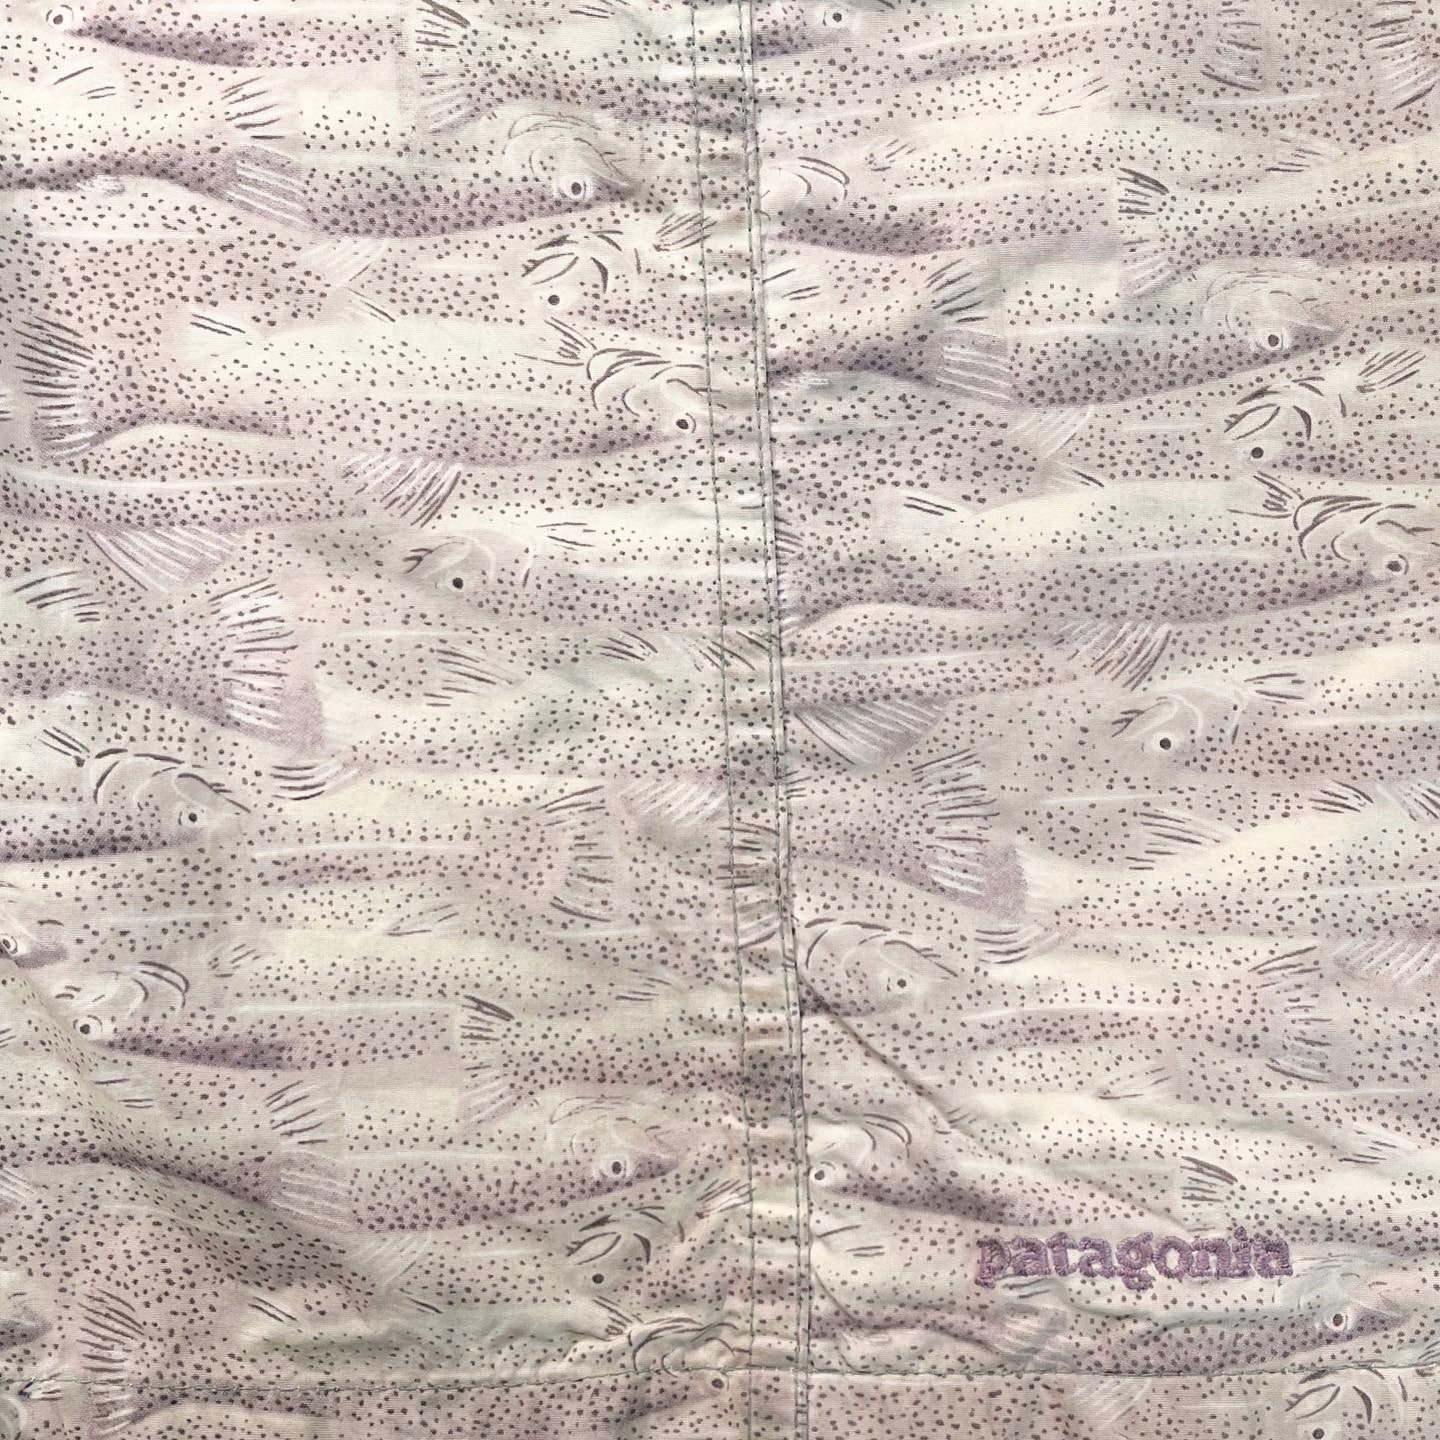 2002 Patagonia Mens 5.5” Printed River Shorts, School of Trout (S)